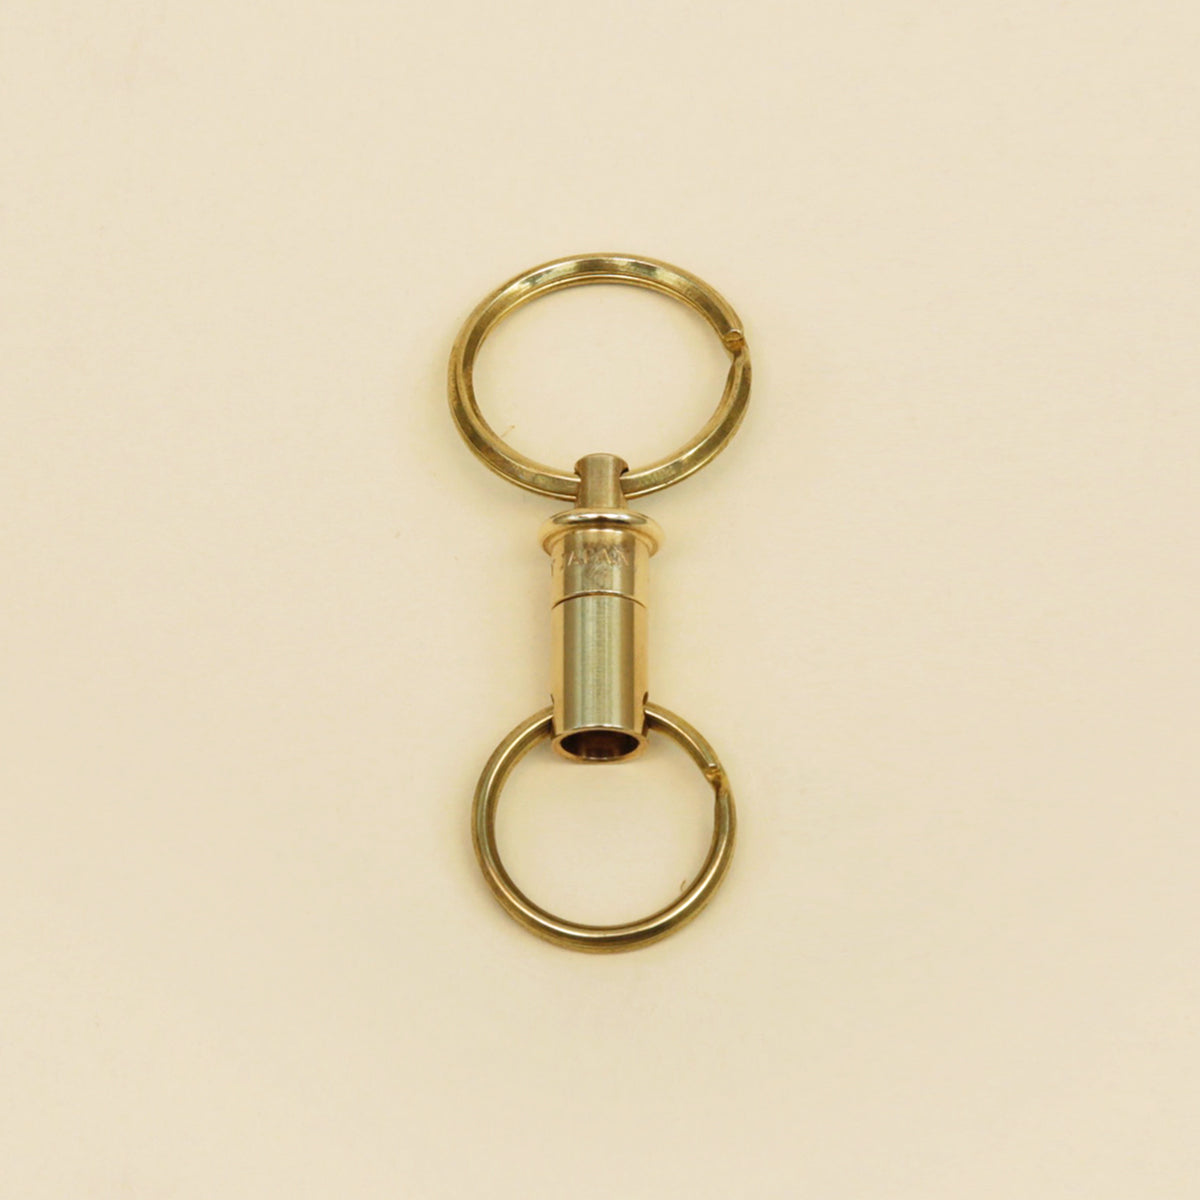 Releasable Brass Key Ring – The Good Liver